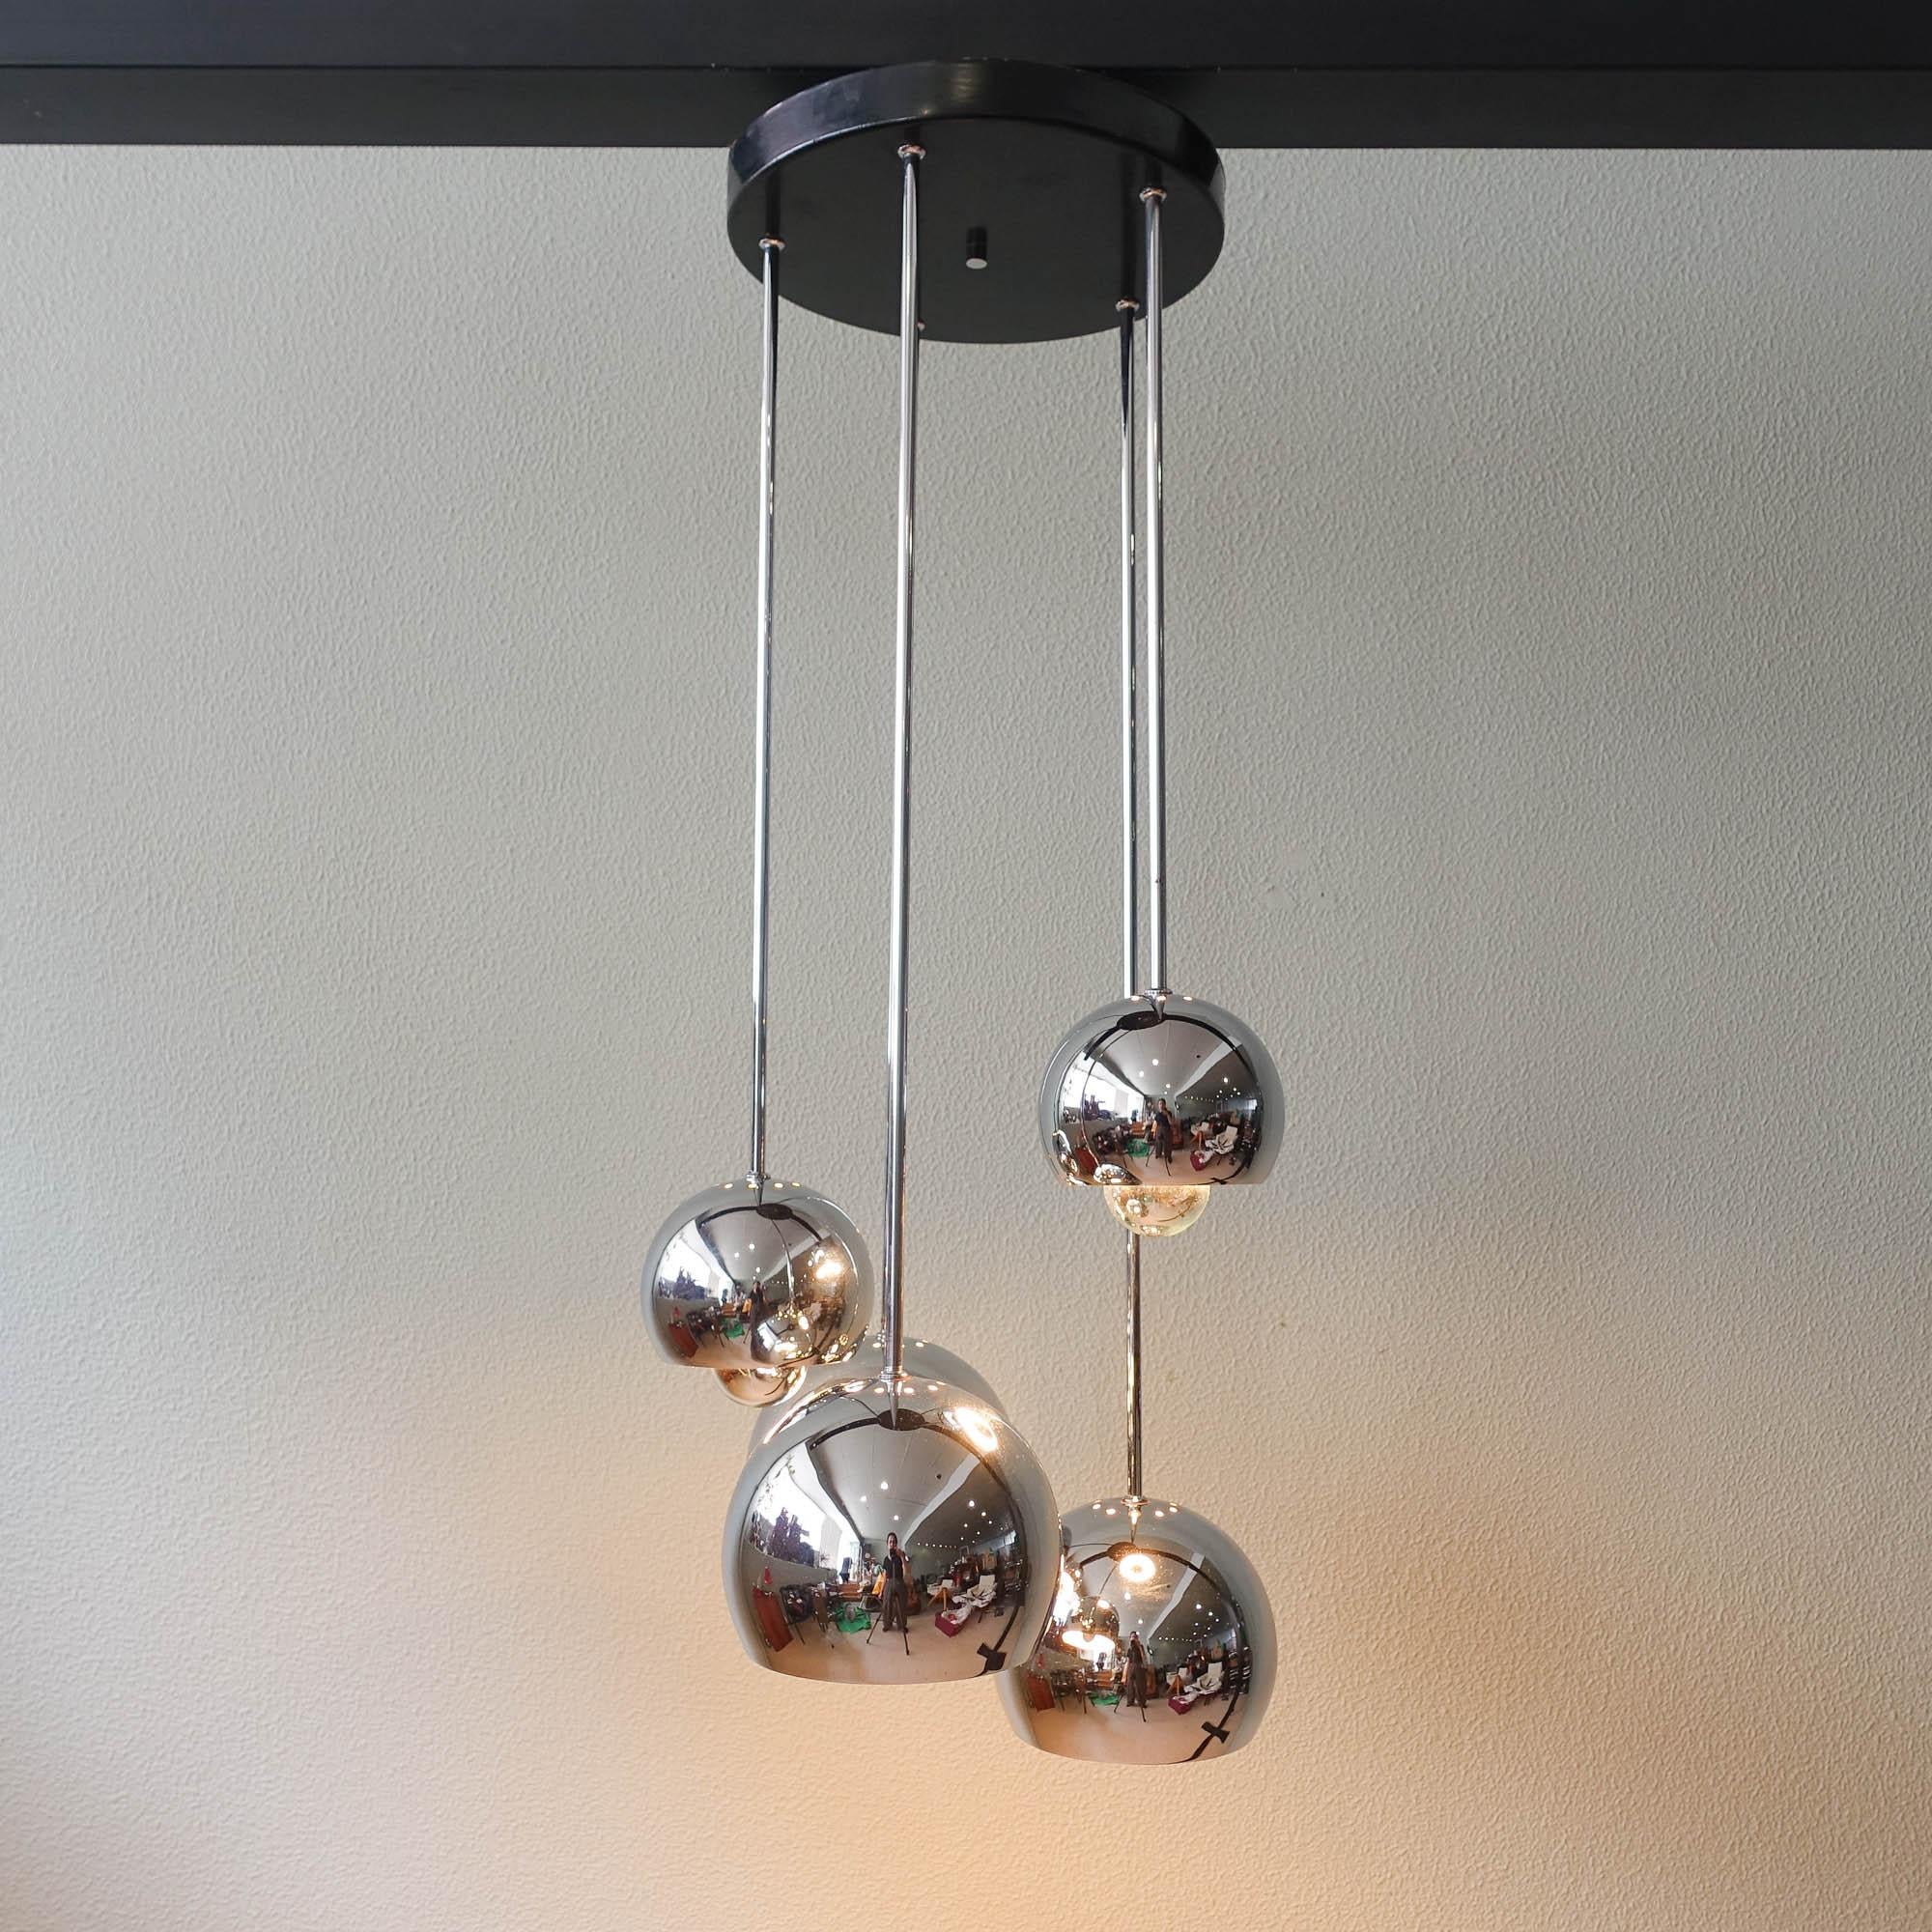 This chromed metal cascade lamp was designed and produced in Portugal during the 1970's. It features five balls in chromed metal in different sizes, that gives an indirect light when the proper mirror bulbs are used. It is in original and good